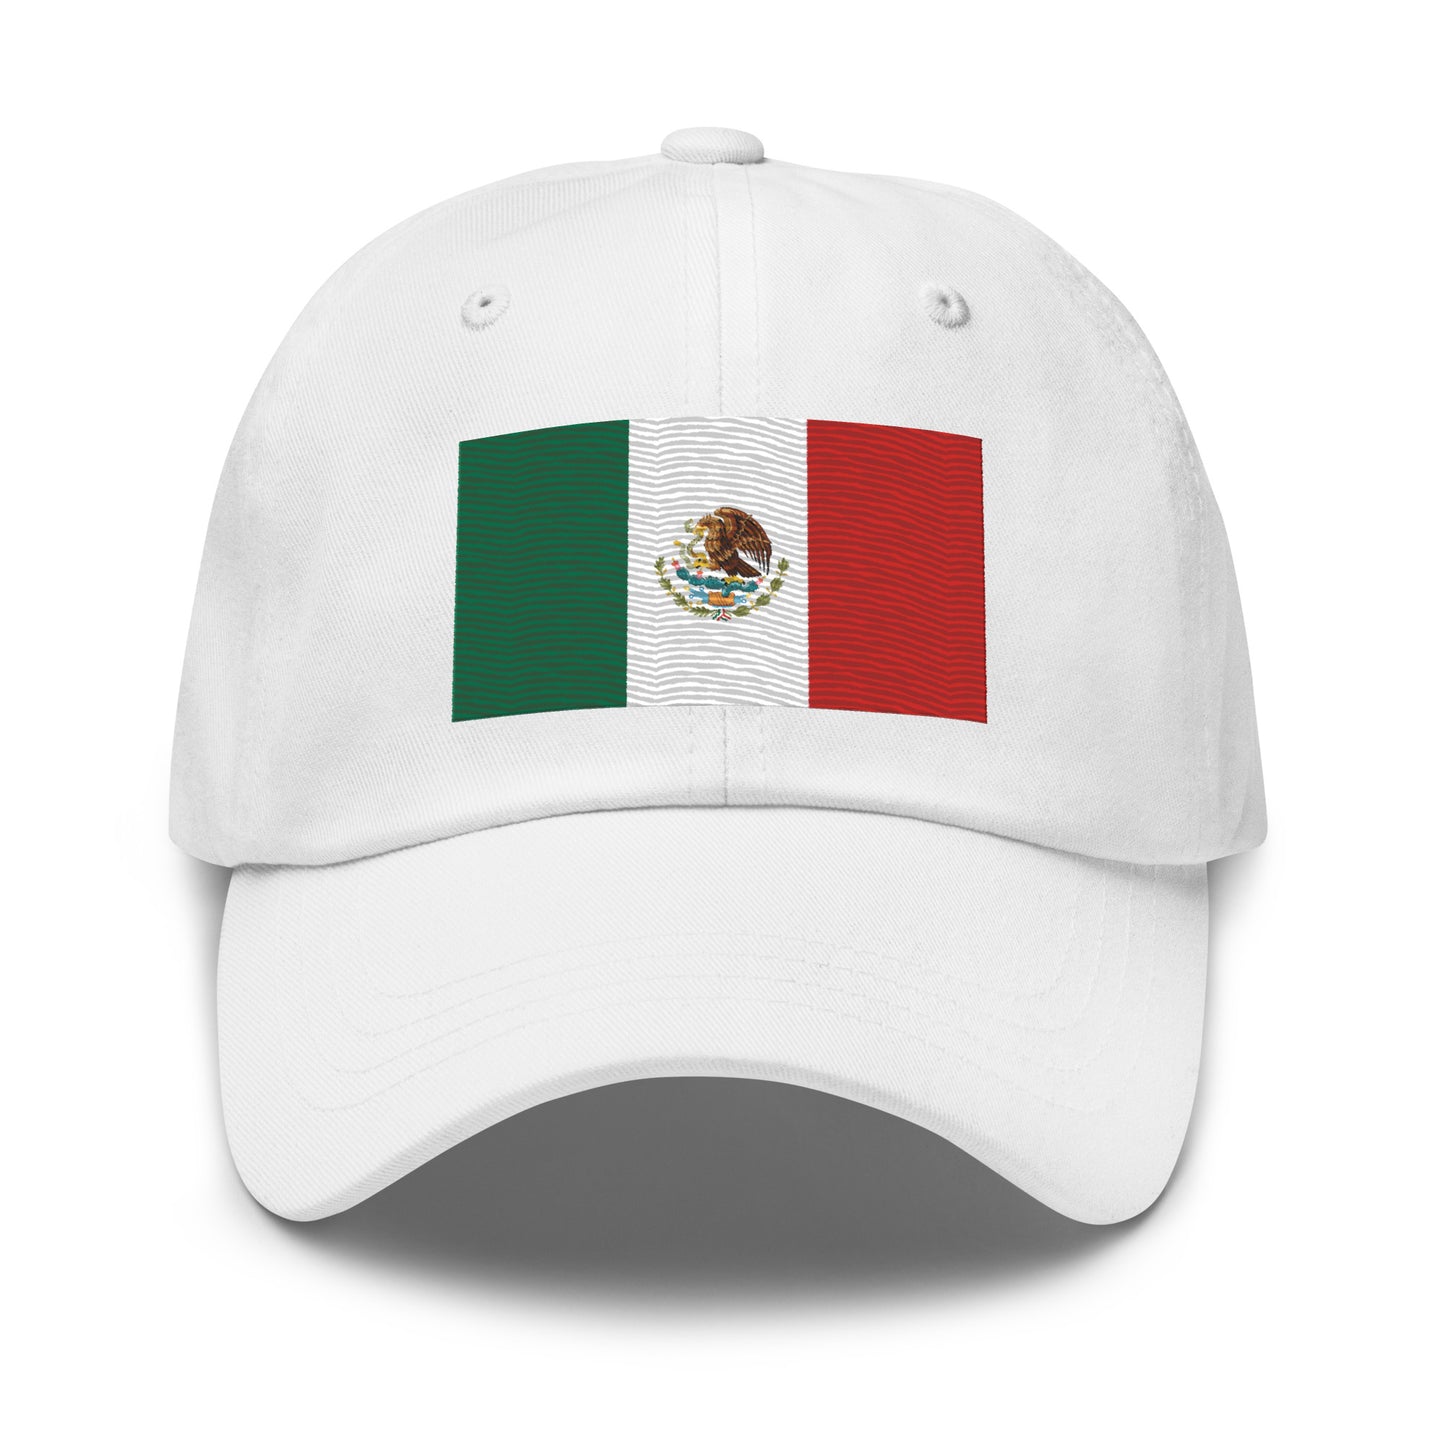 White Dad Hat with Embroidered Mexico Flag